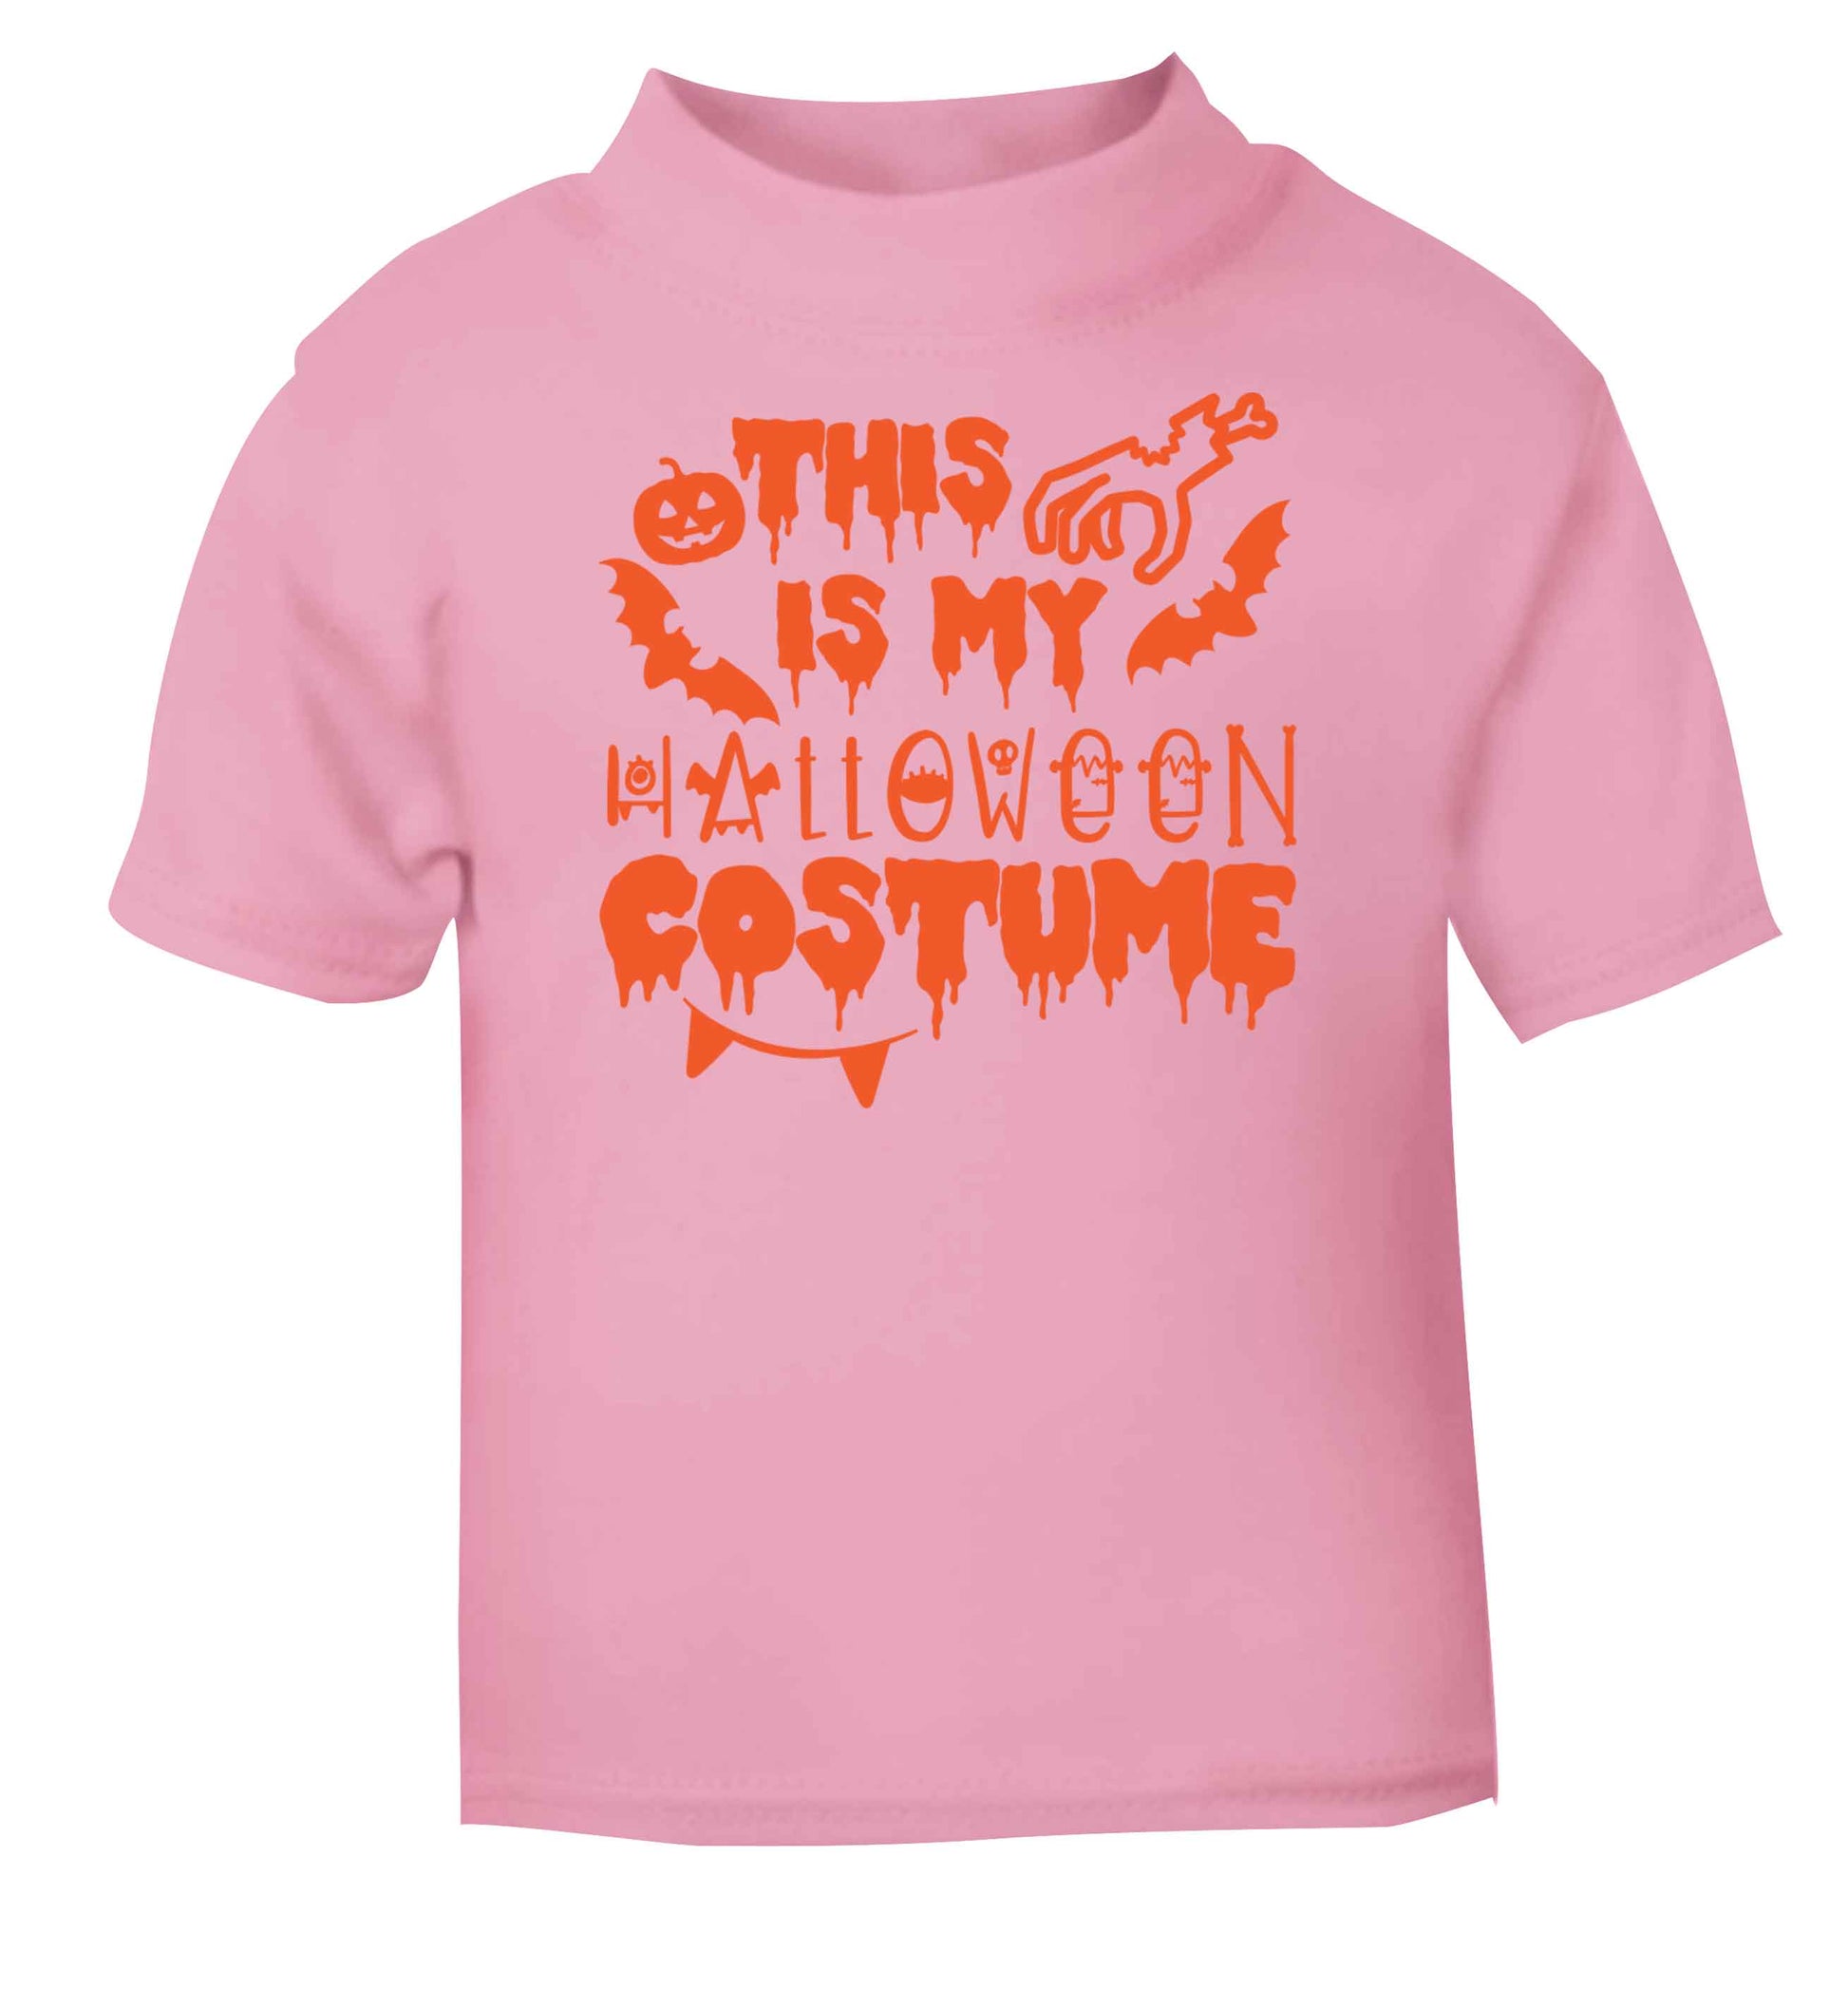 This is my halloween costume light pink baby toddler Tshirt 2 Years